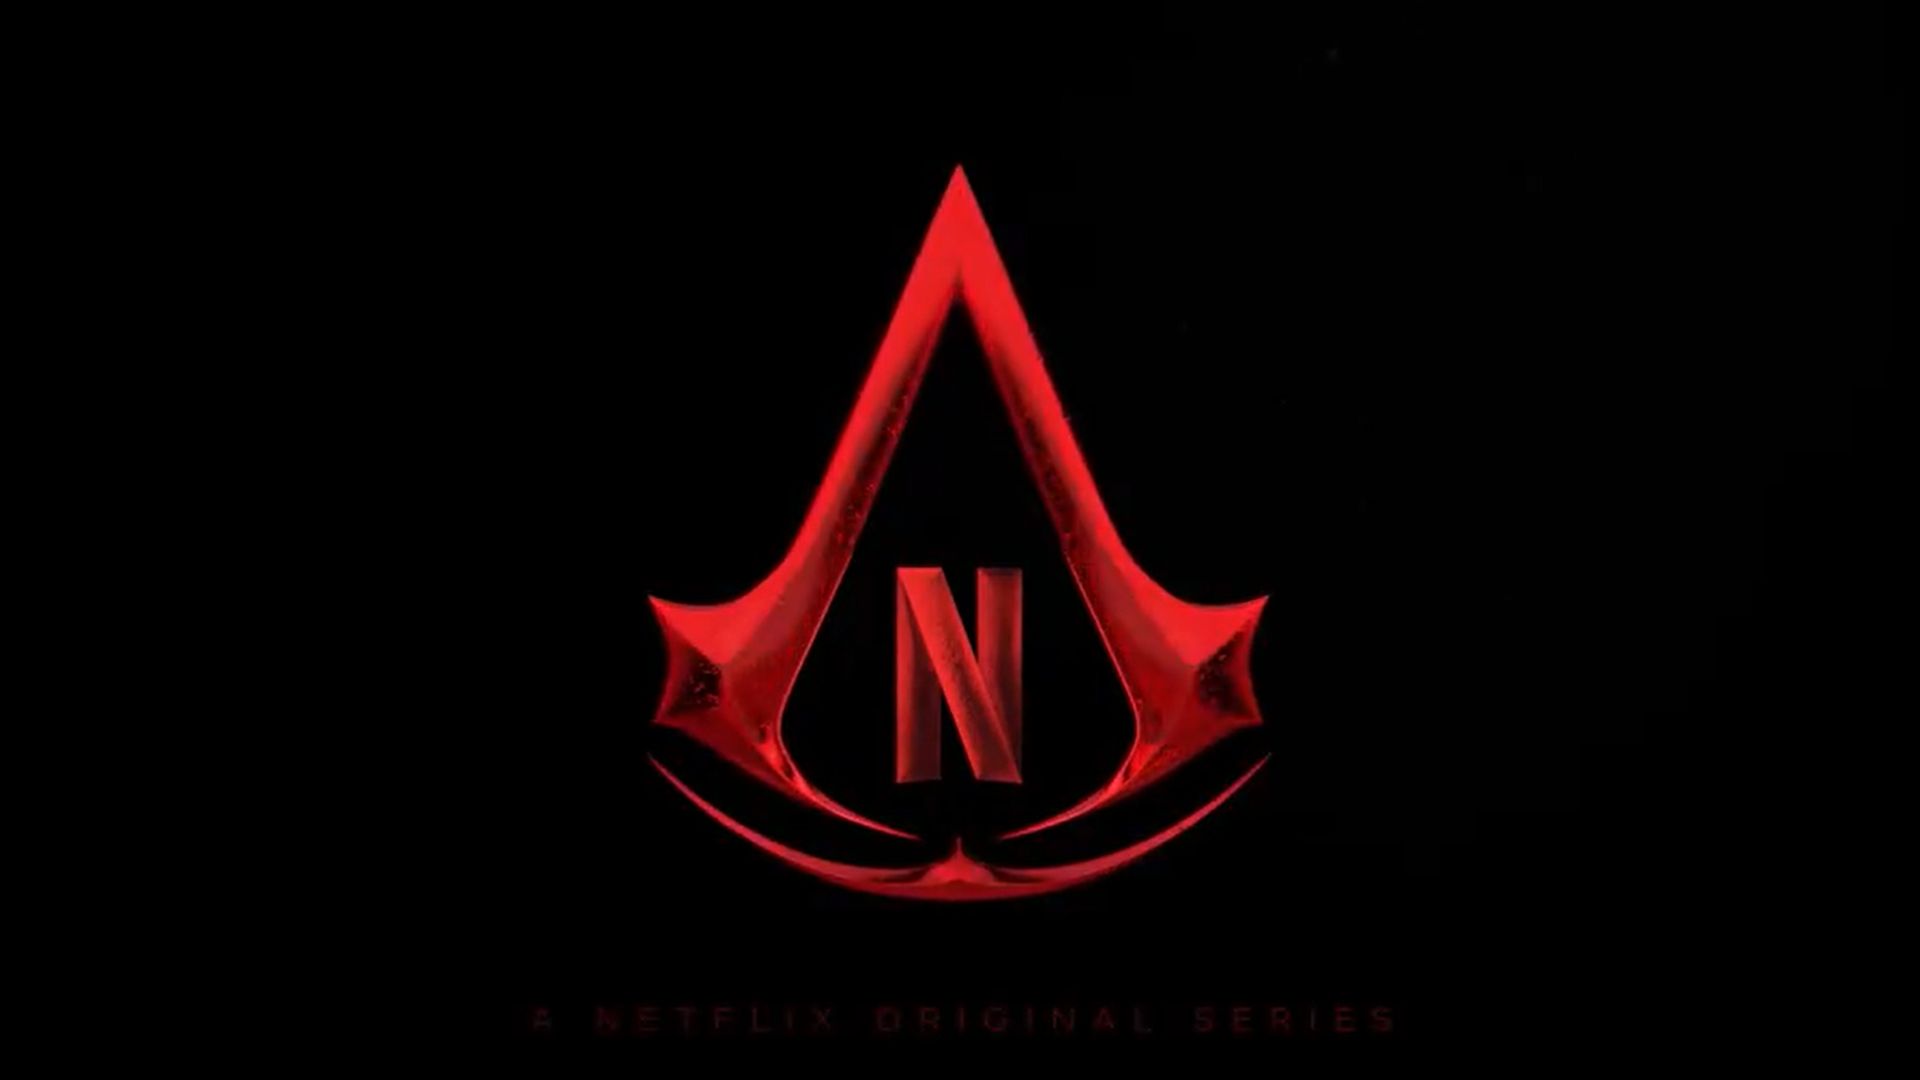 Netflix’s live-action Assassin’s Creed show brings Die Hard writer on board